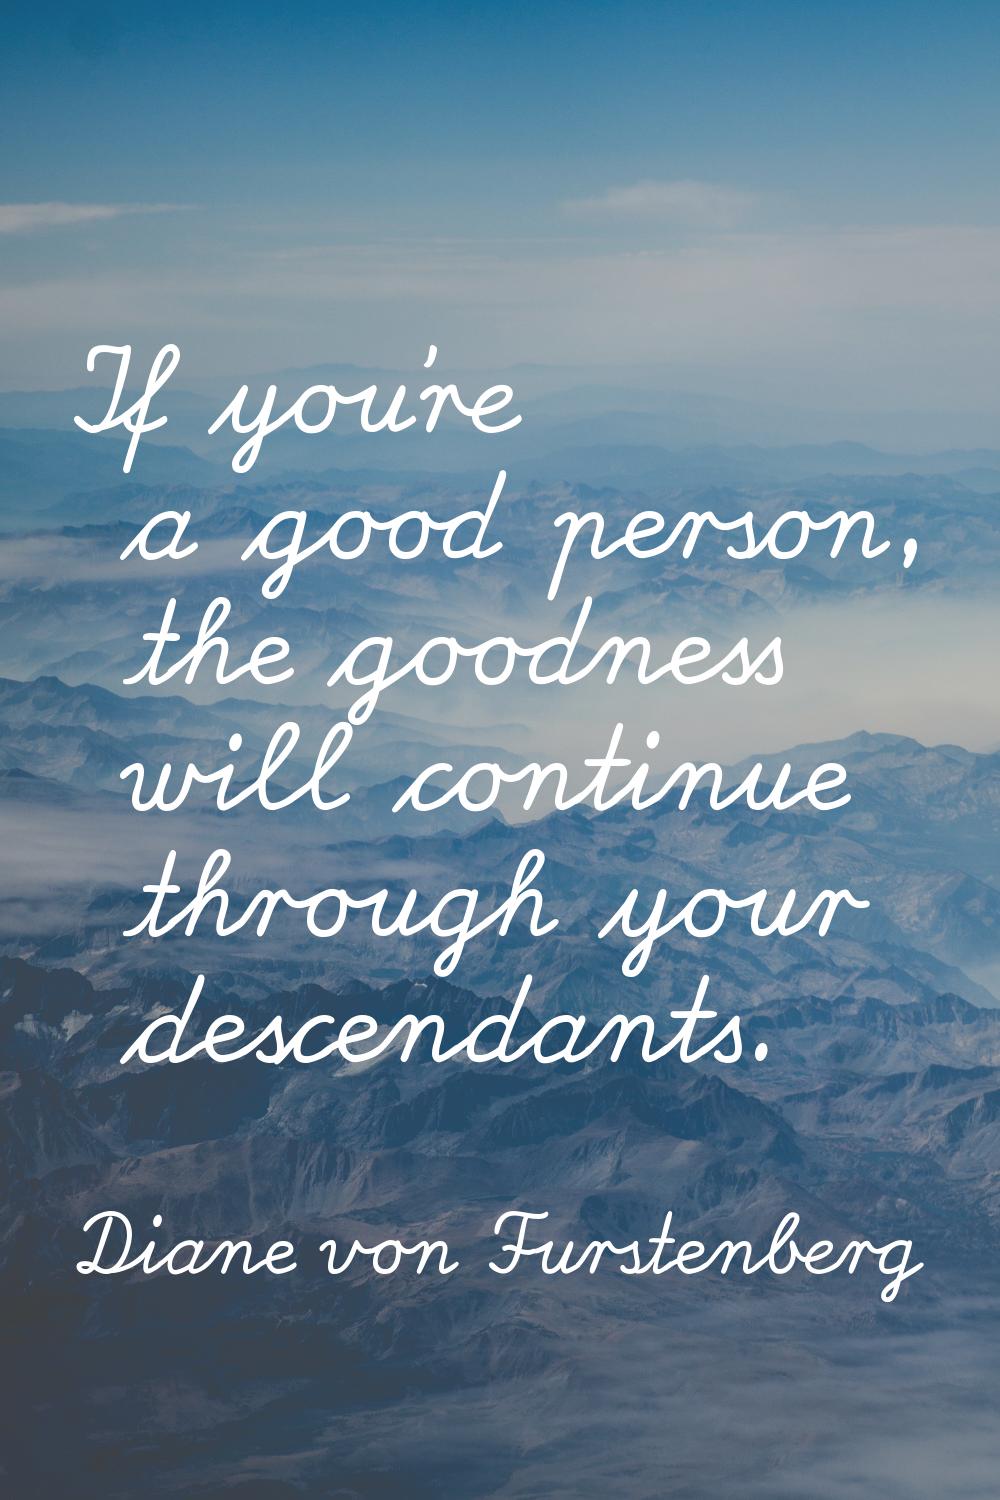 If you're a good person, the goodness will continue through your descendants.